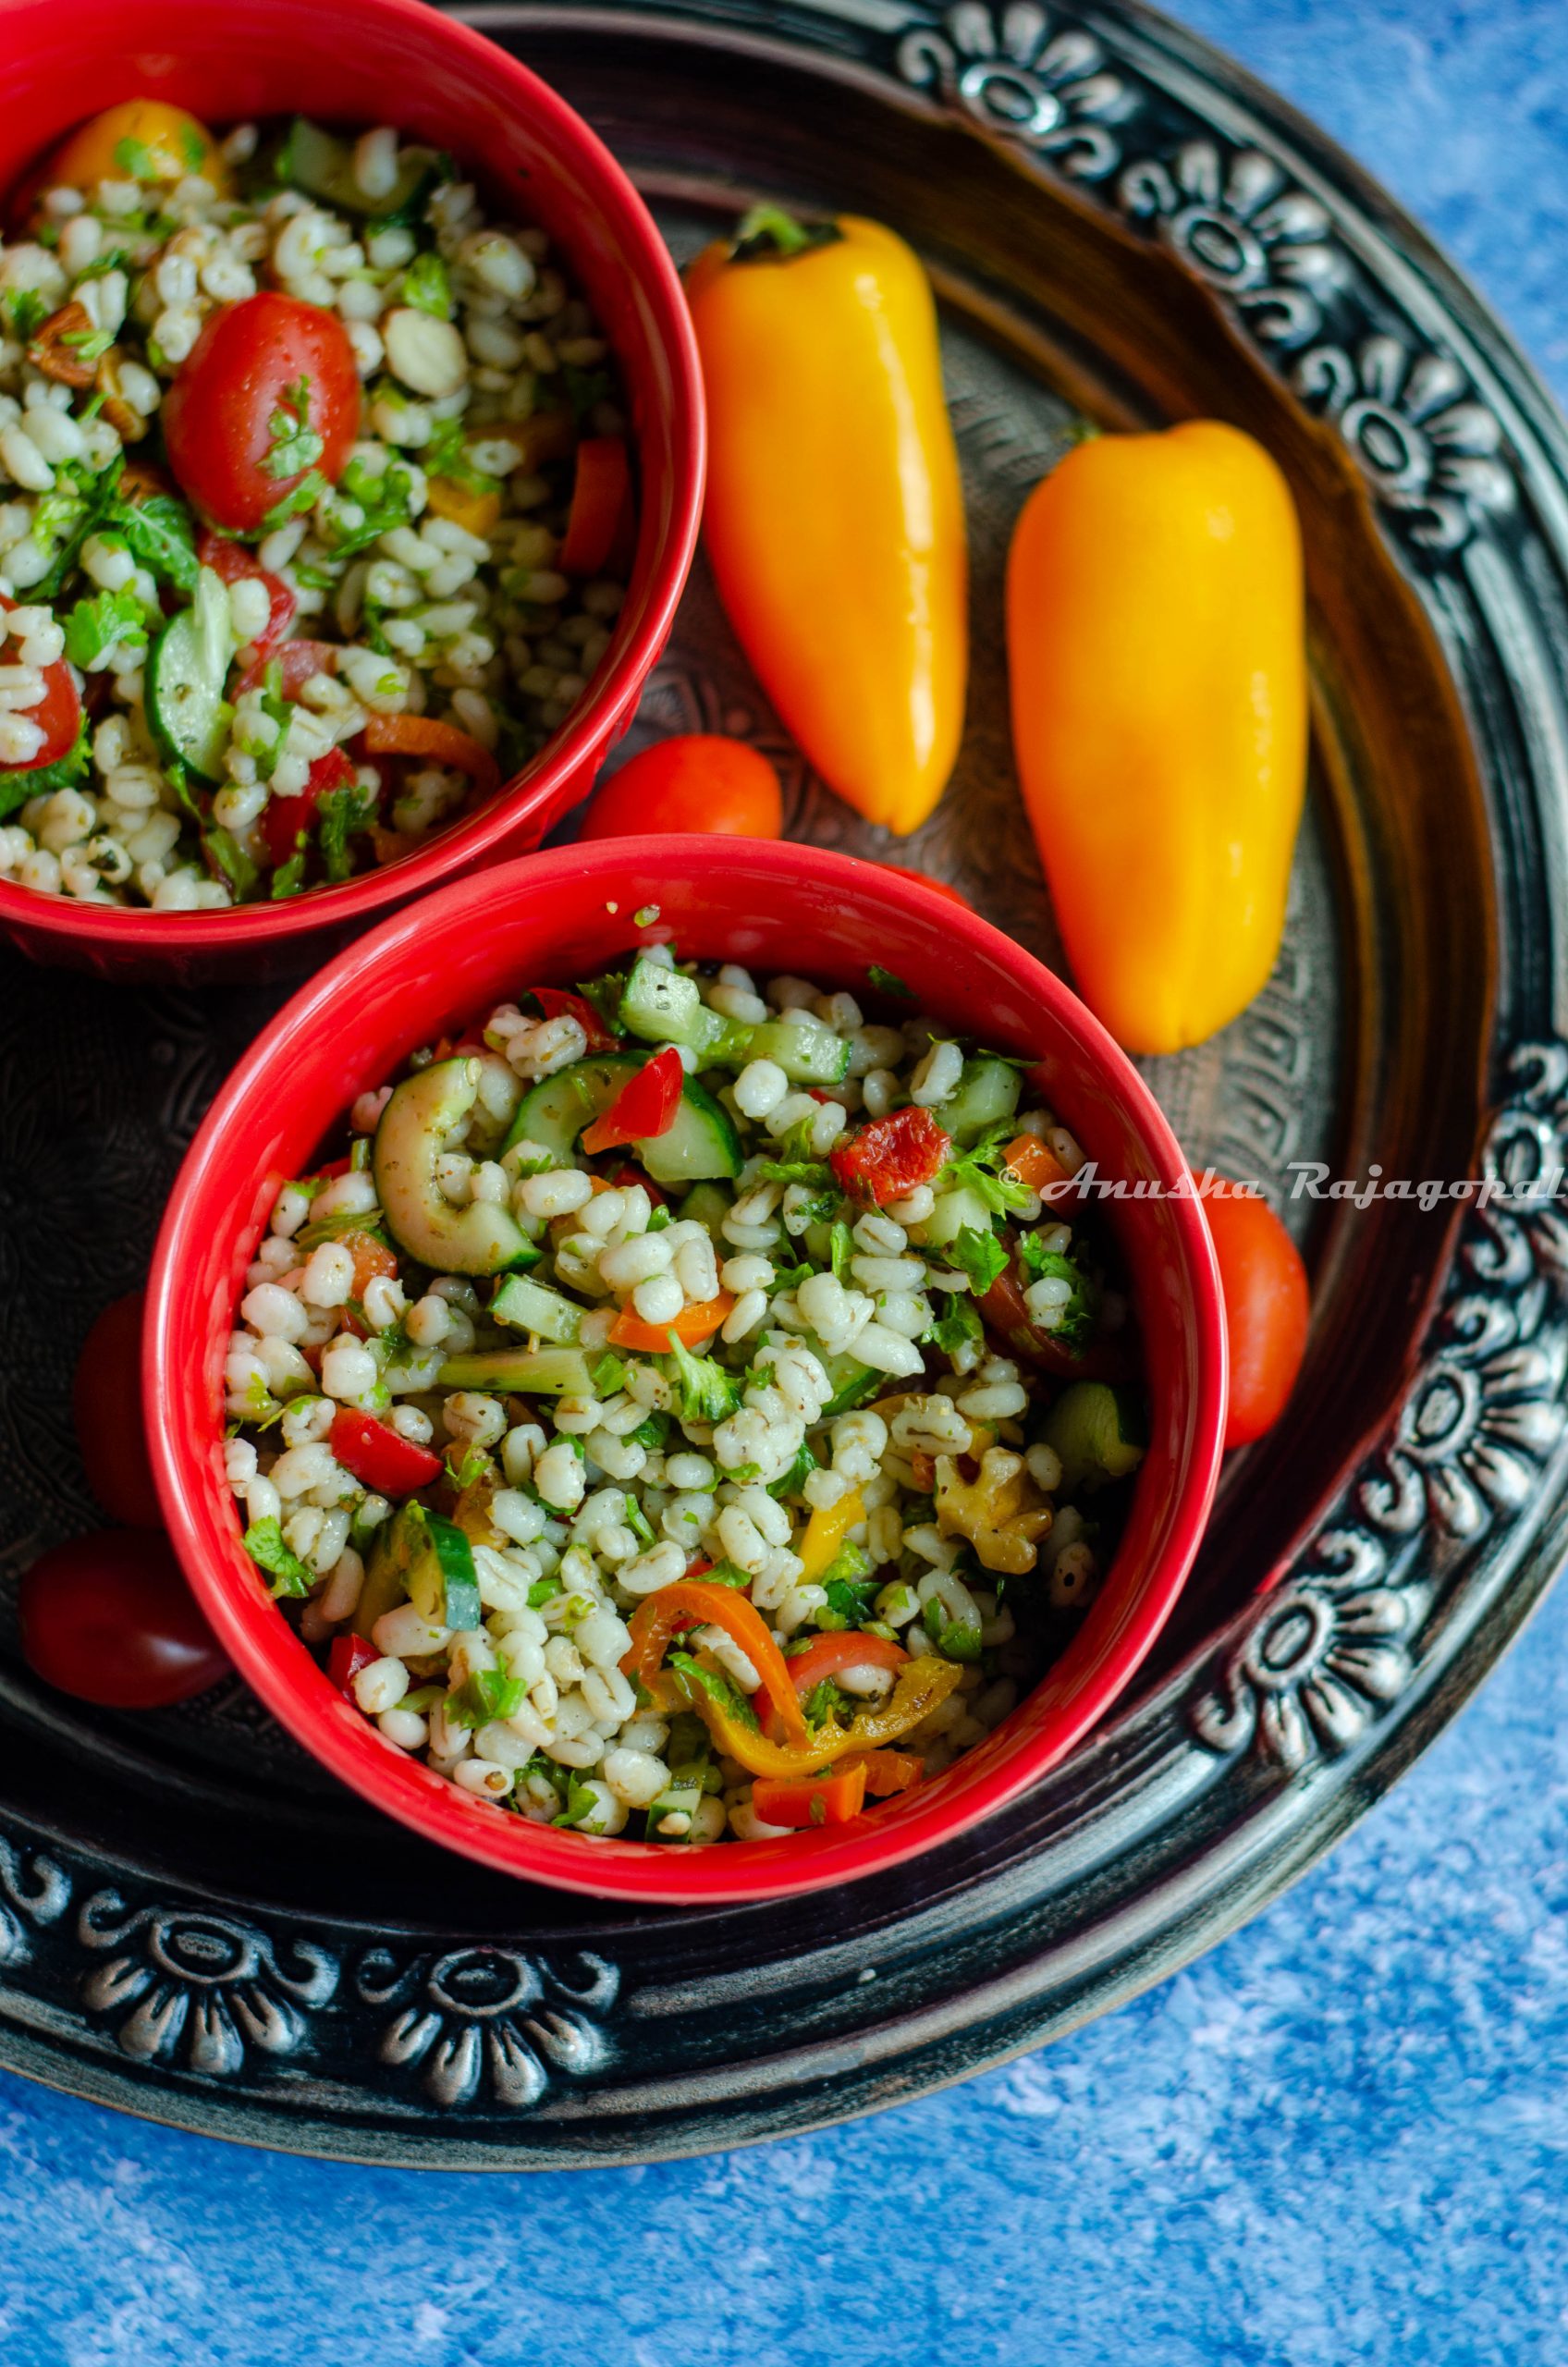 pearl barley tabbouleh salad served in two red bowls placed on a grey rustic platter.